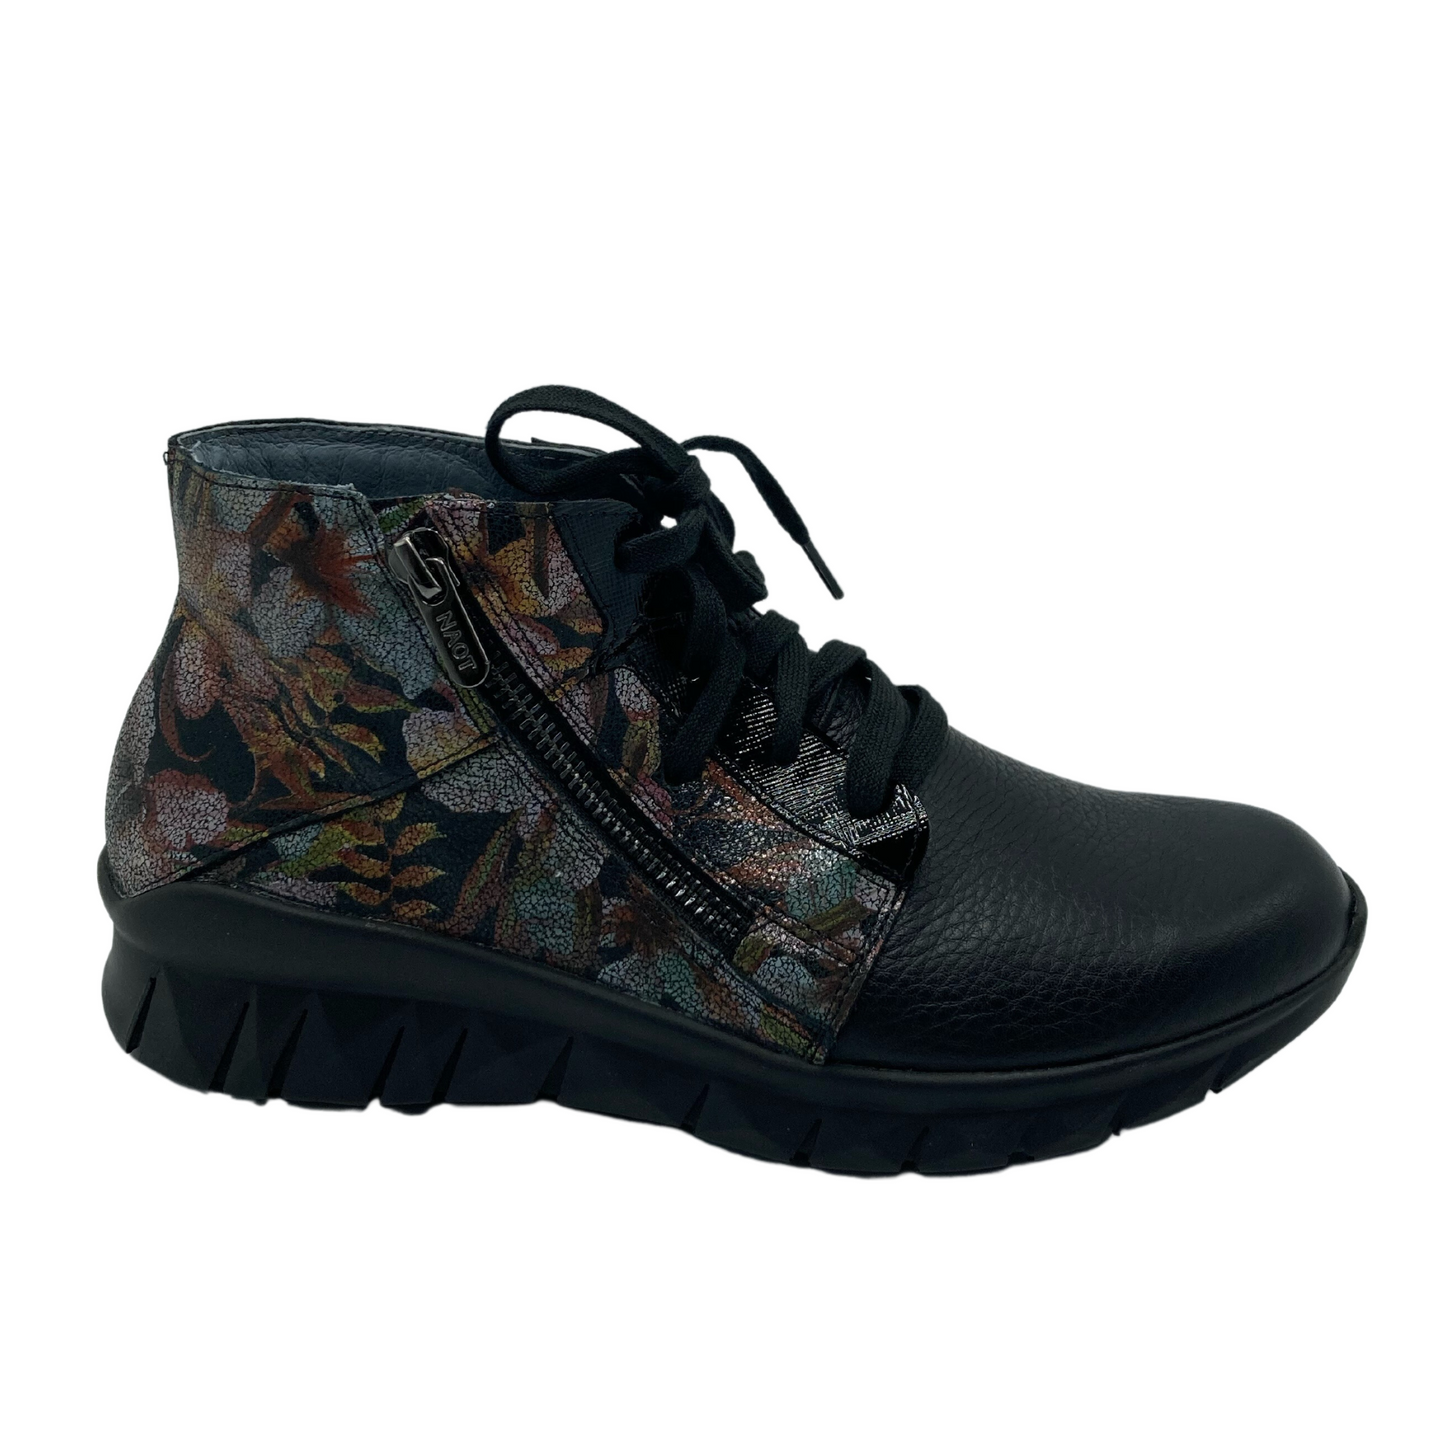 Right facing view of black leather sneaker with floral accent and black slip resistant sole